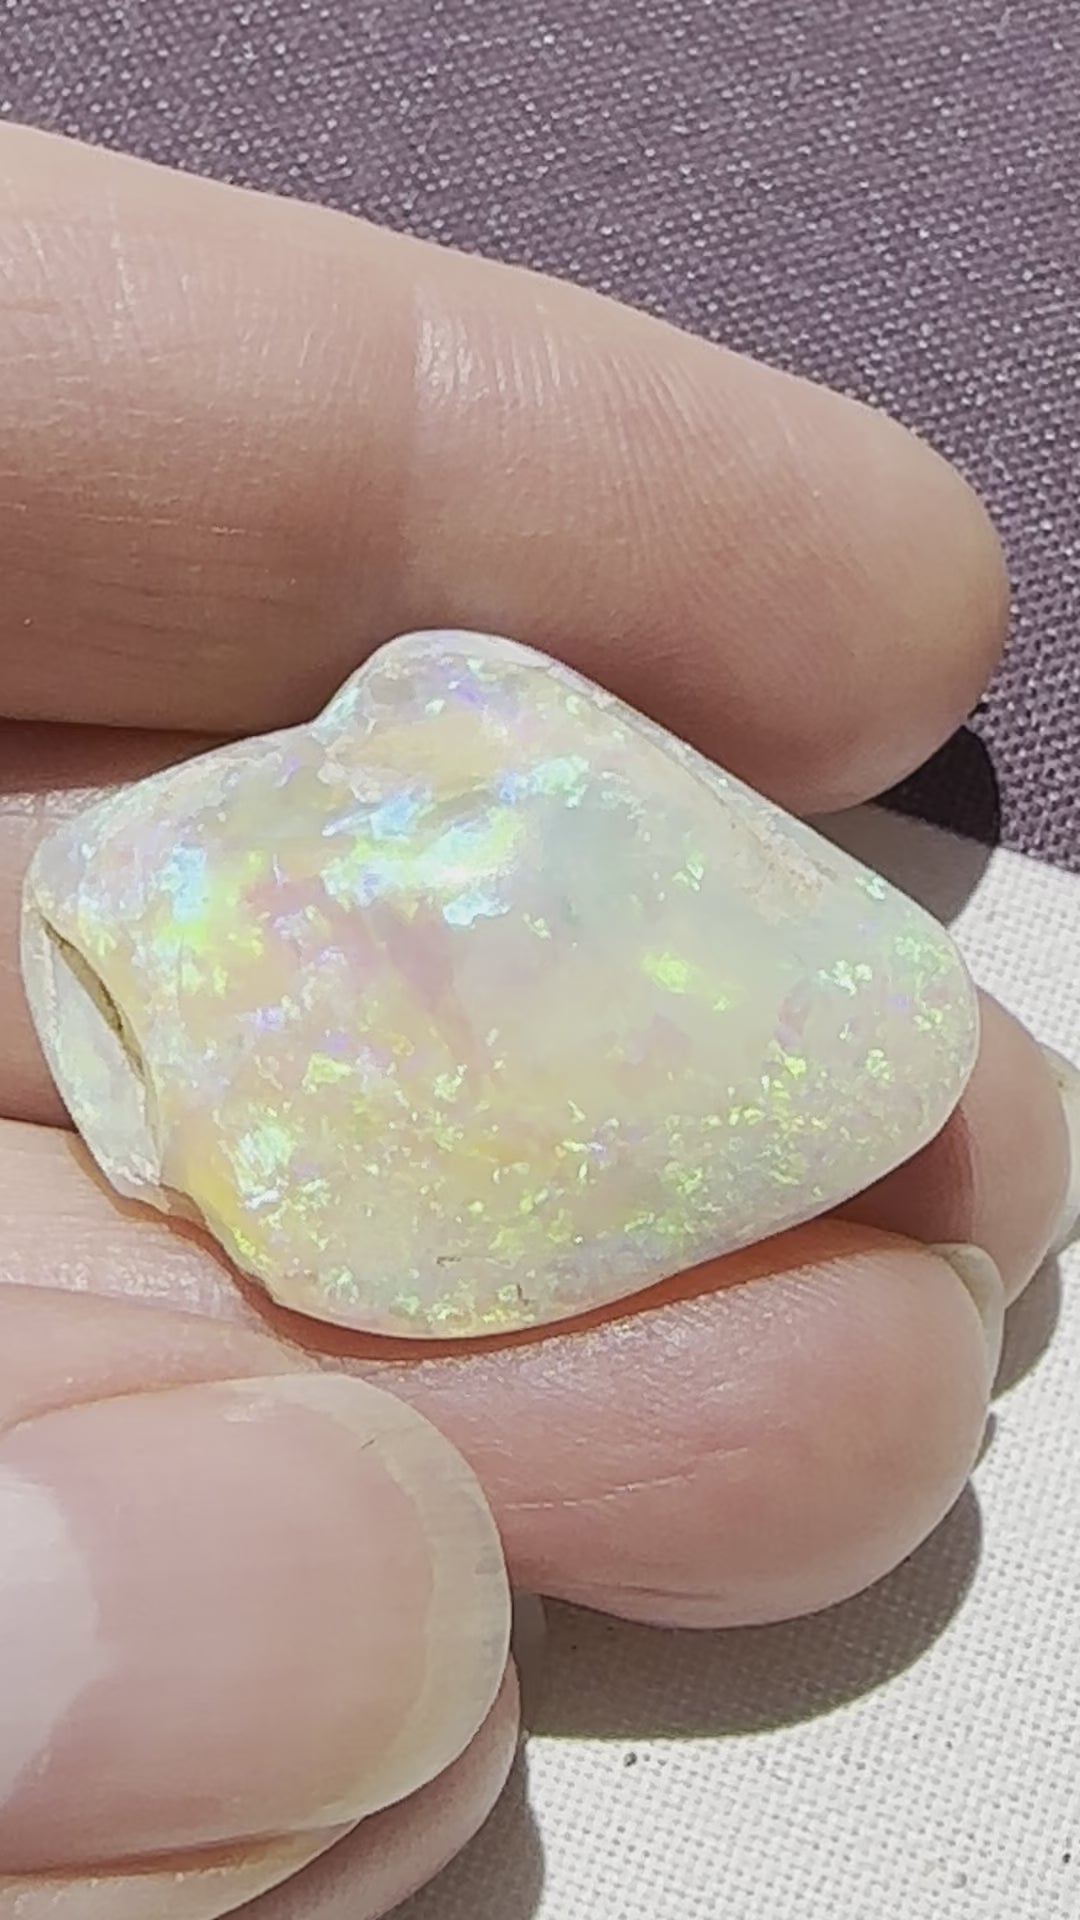 Coober Pedy Gem Crystal Shell 33.75 cts